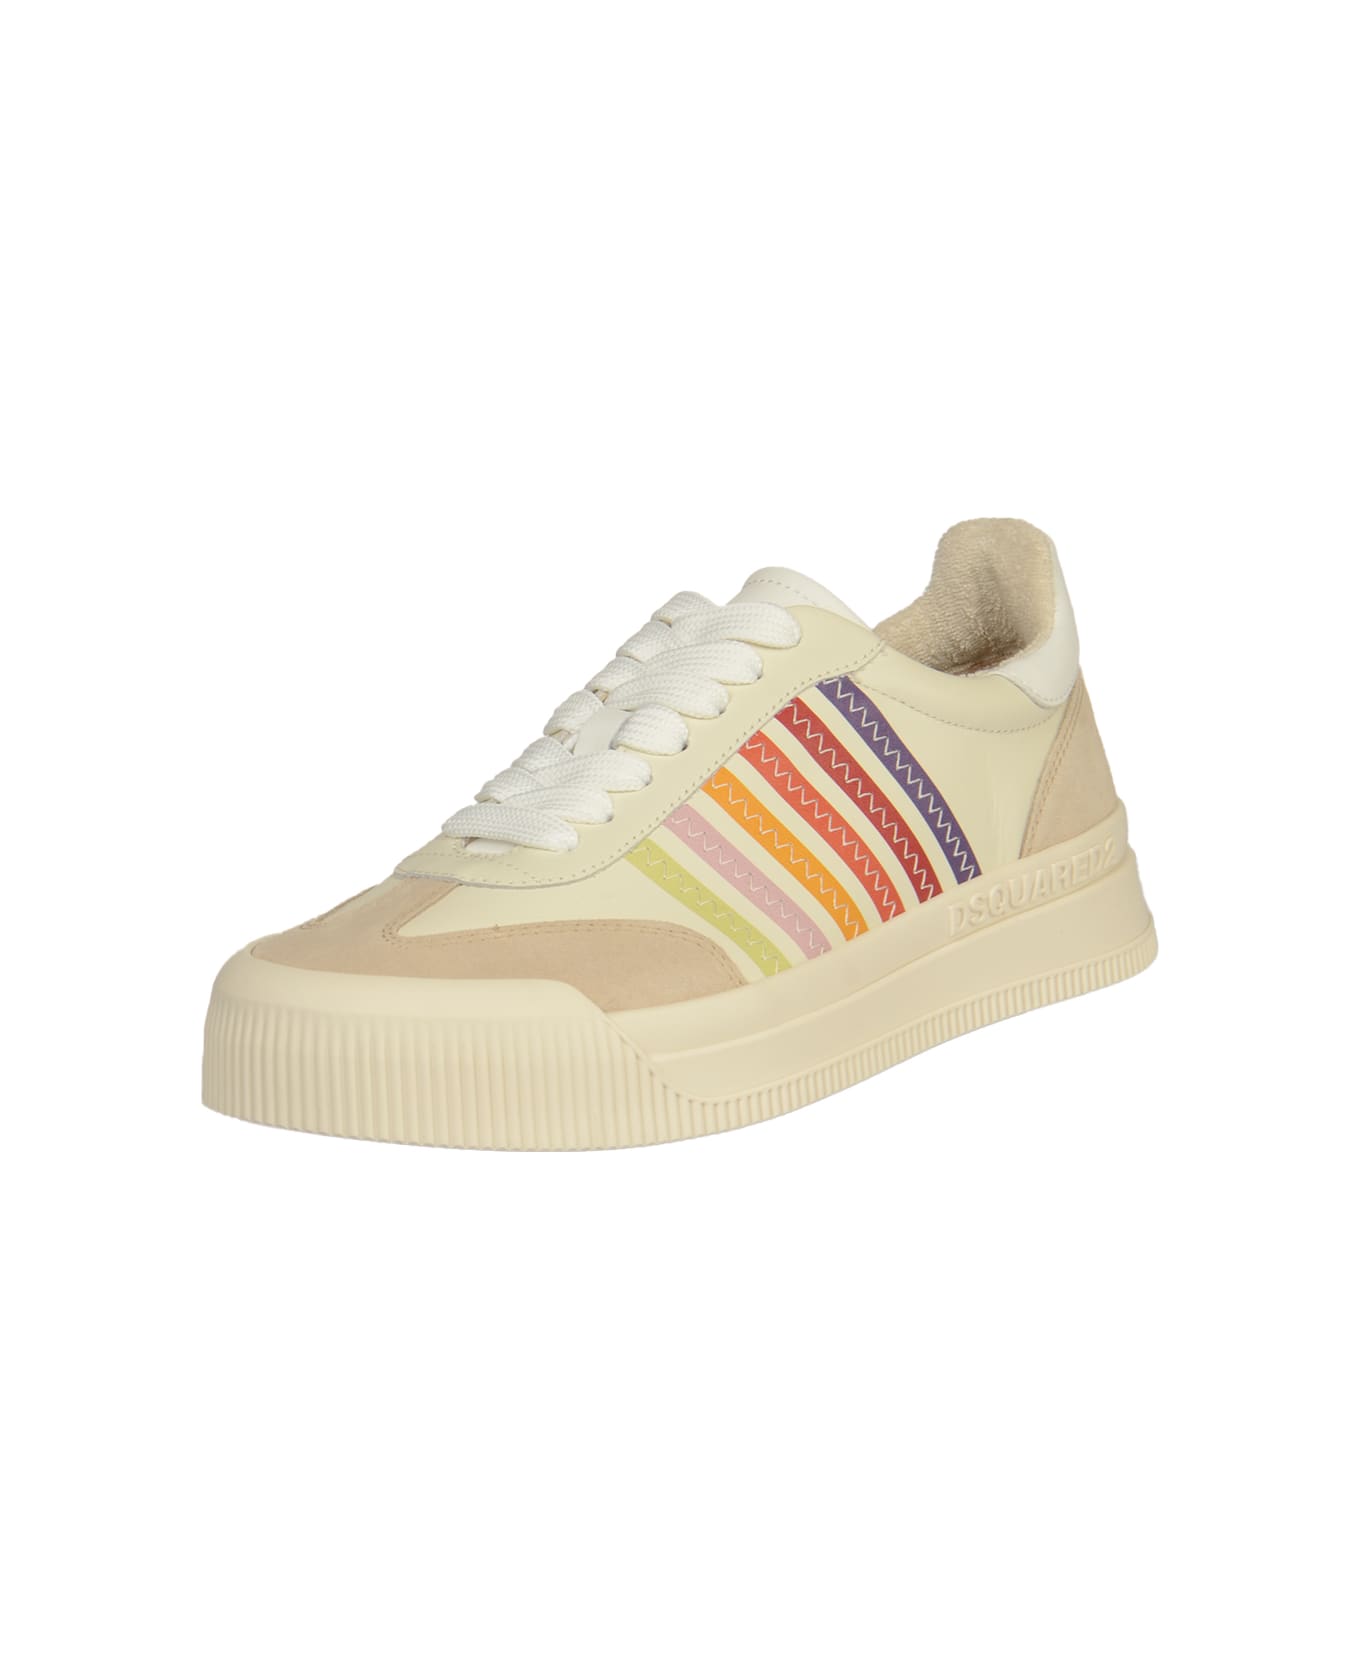 Dsquared2 New Jersey Sneakers - Beige/Multicolor